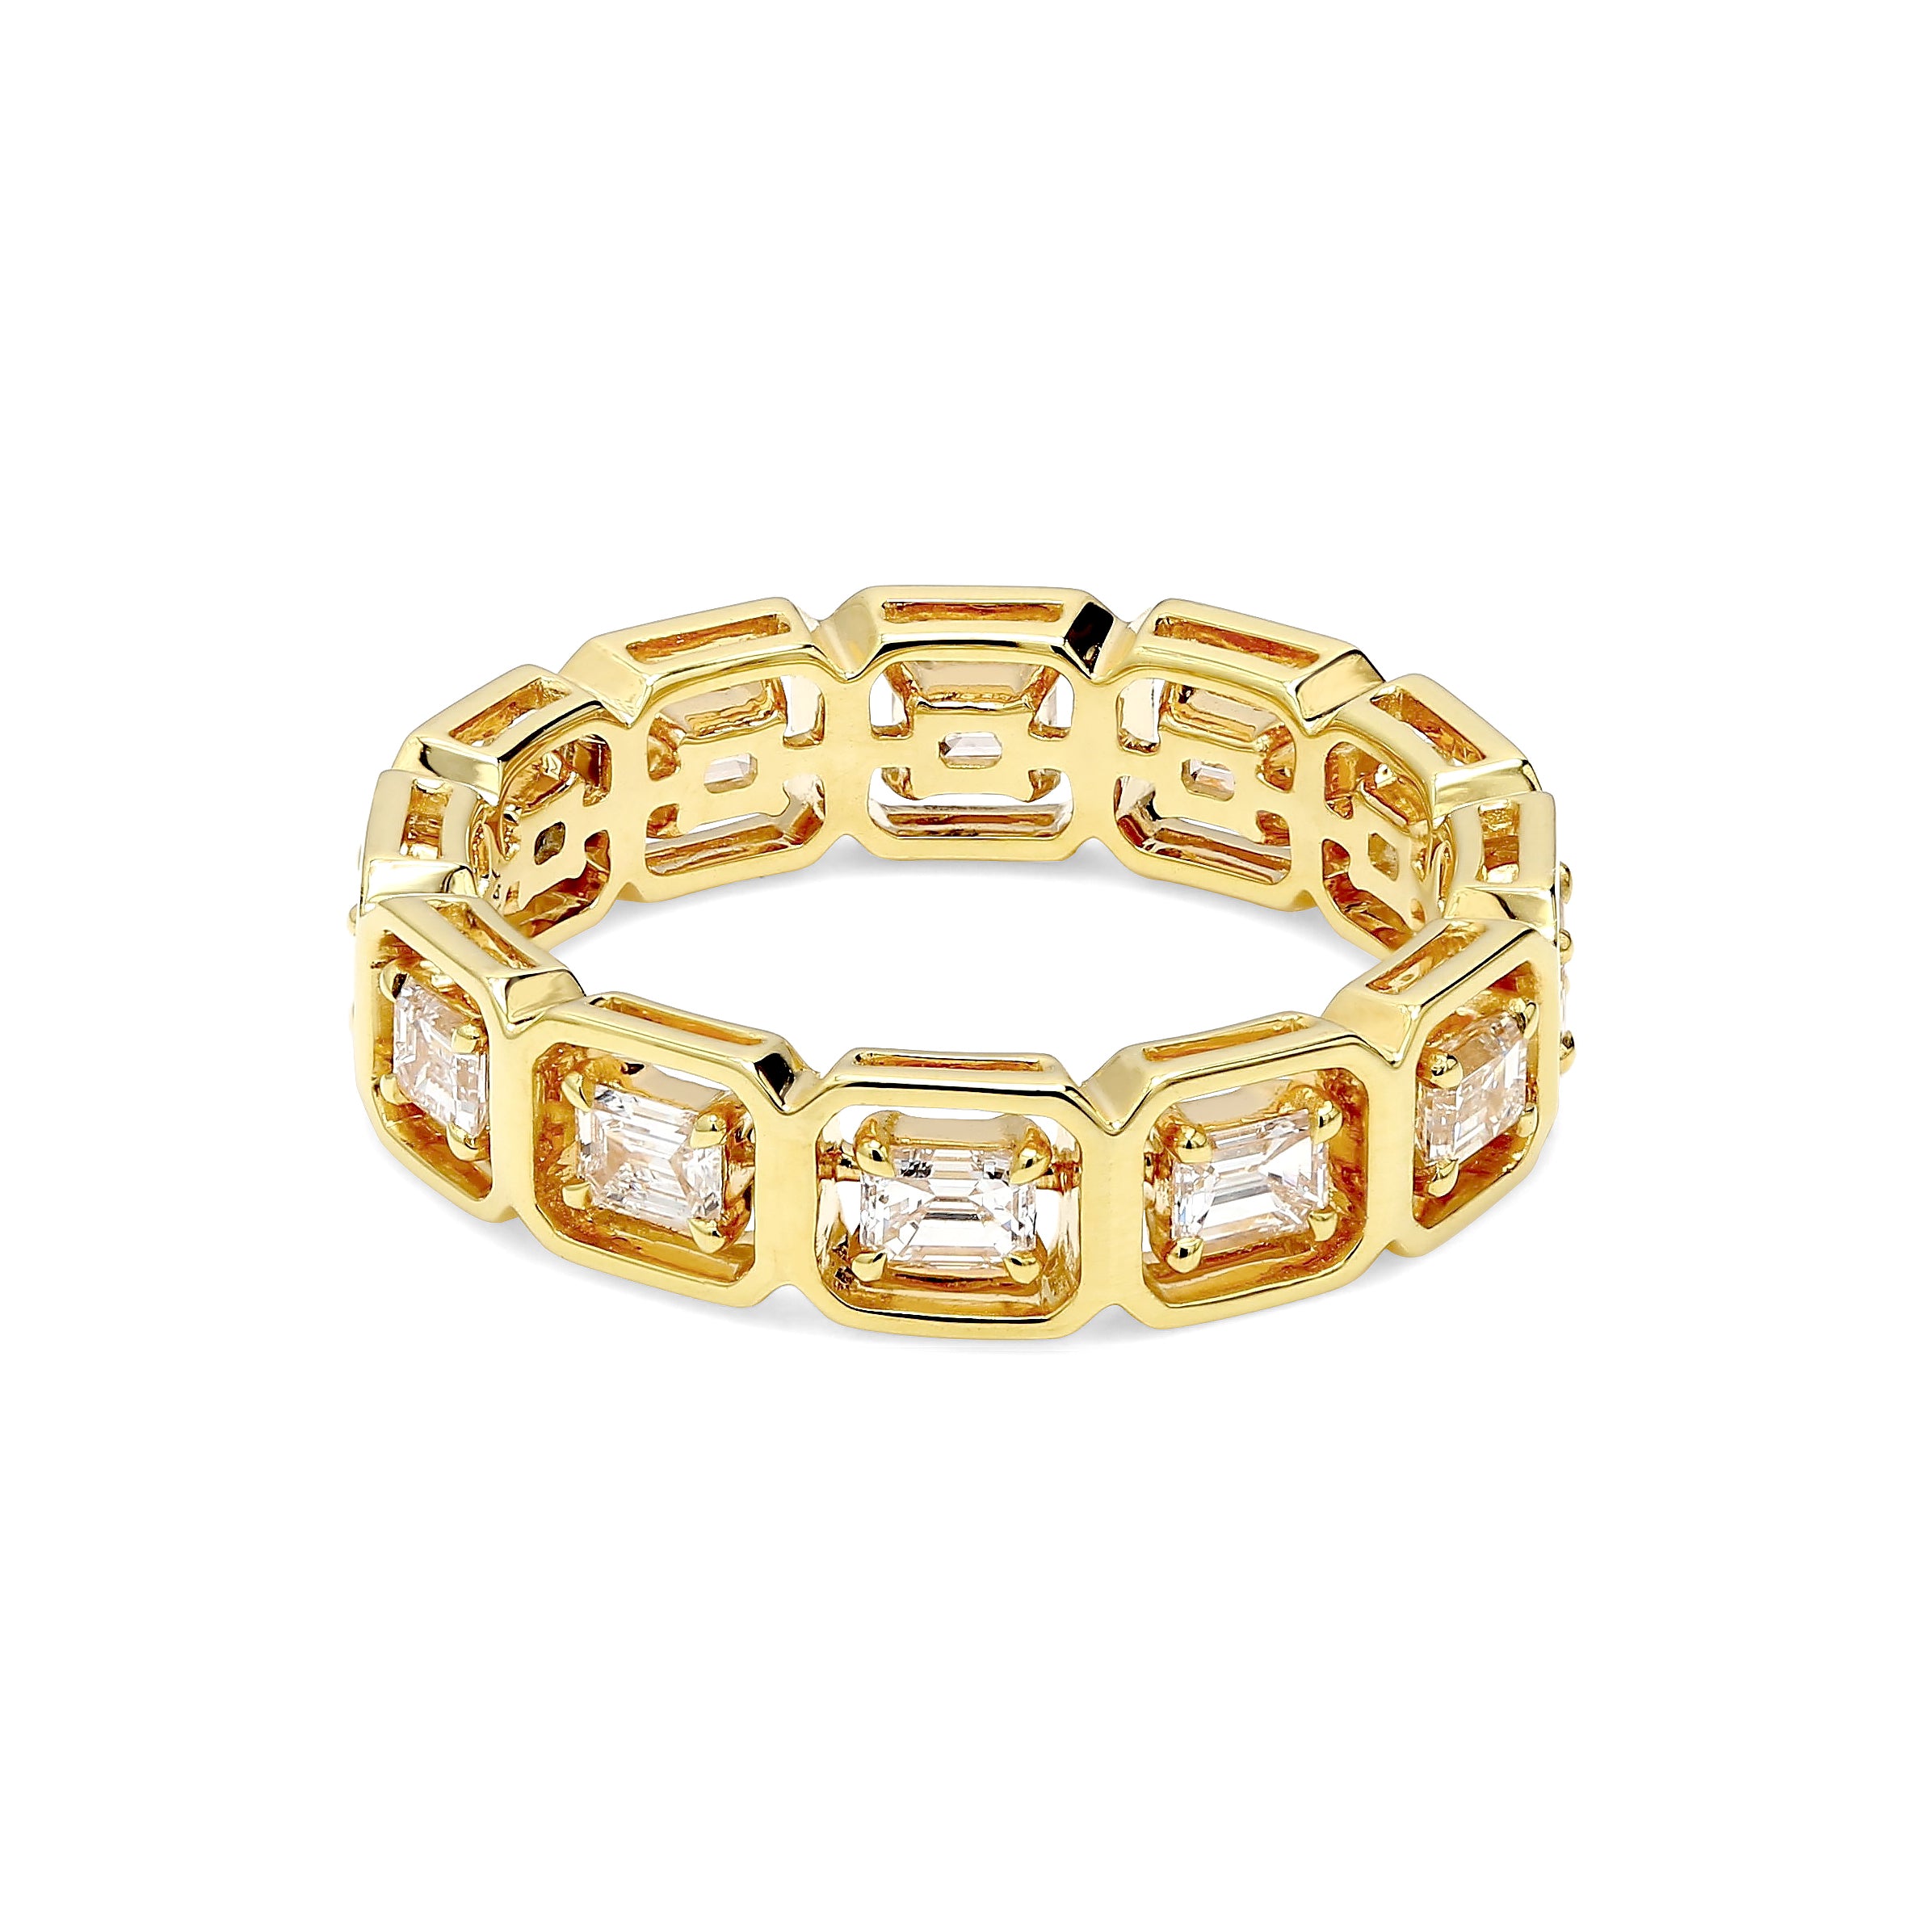 Shimansky - Saturn Emerald Eternity Diamond Ring 1.00ct crafted in 14K Yellow Gold